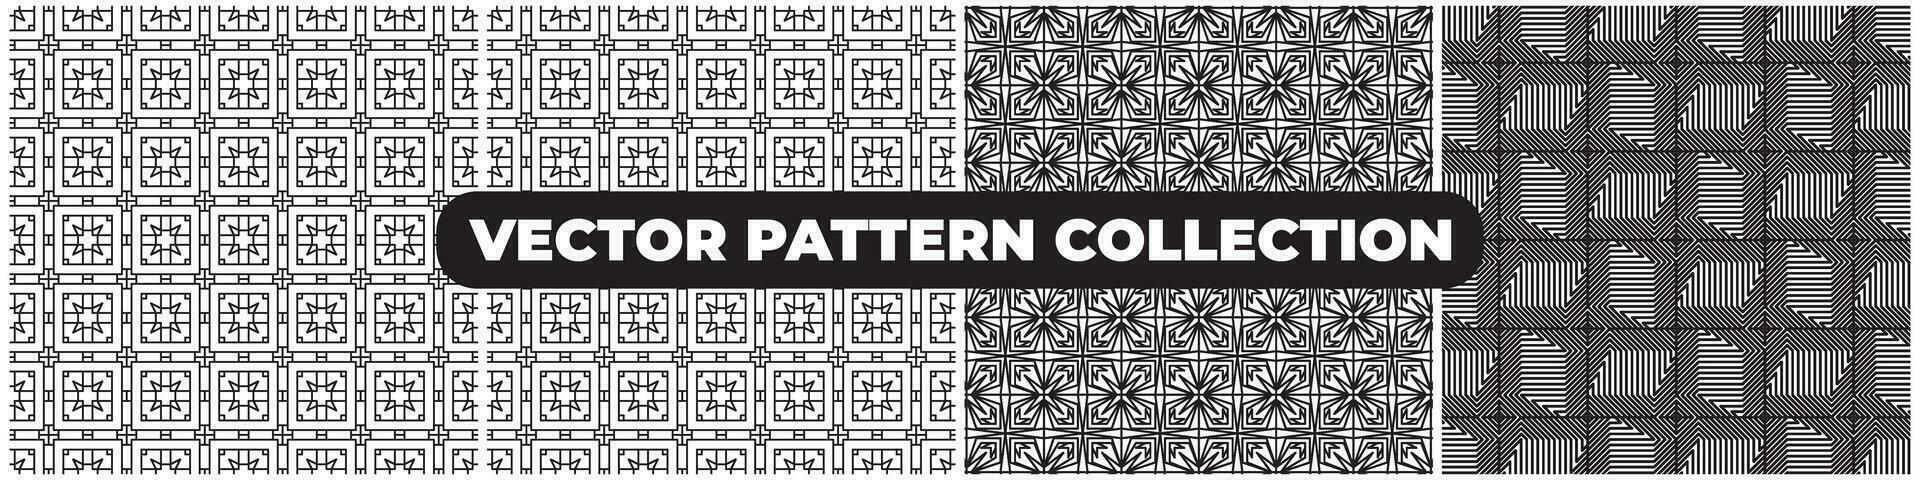 vector pattern colletion